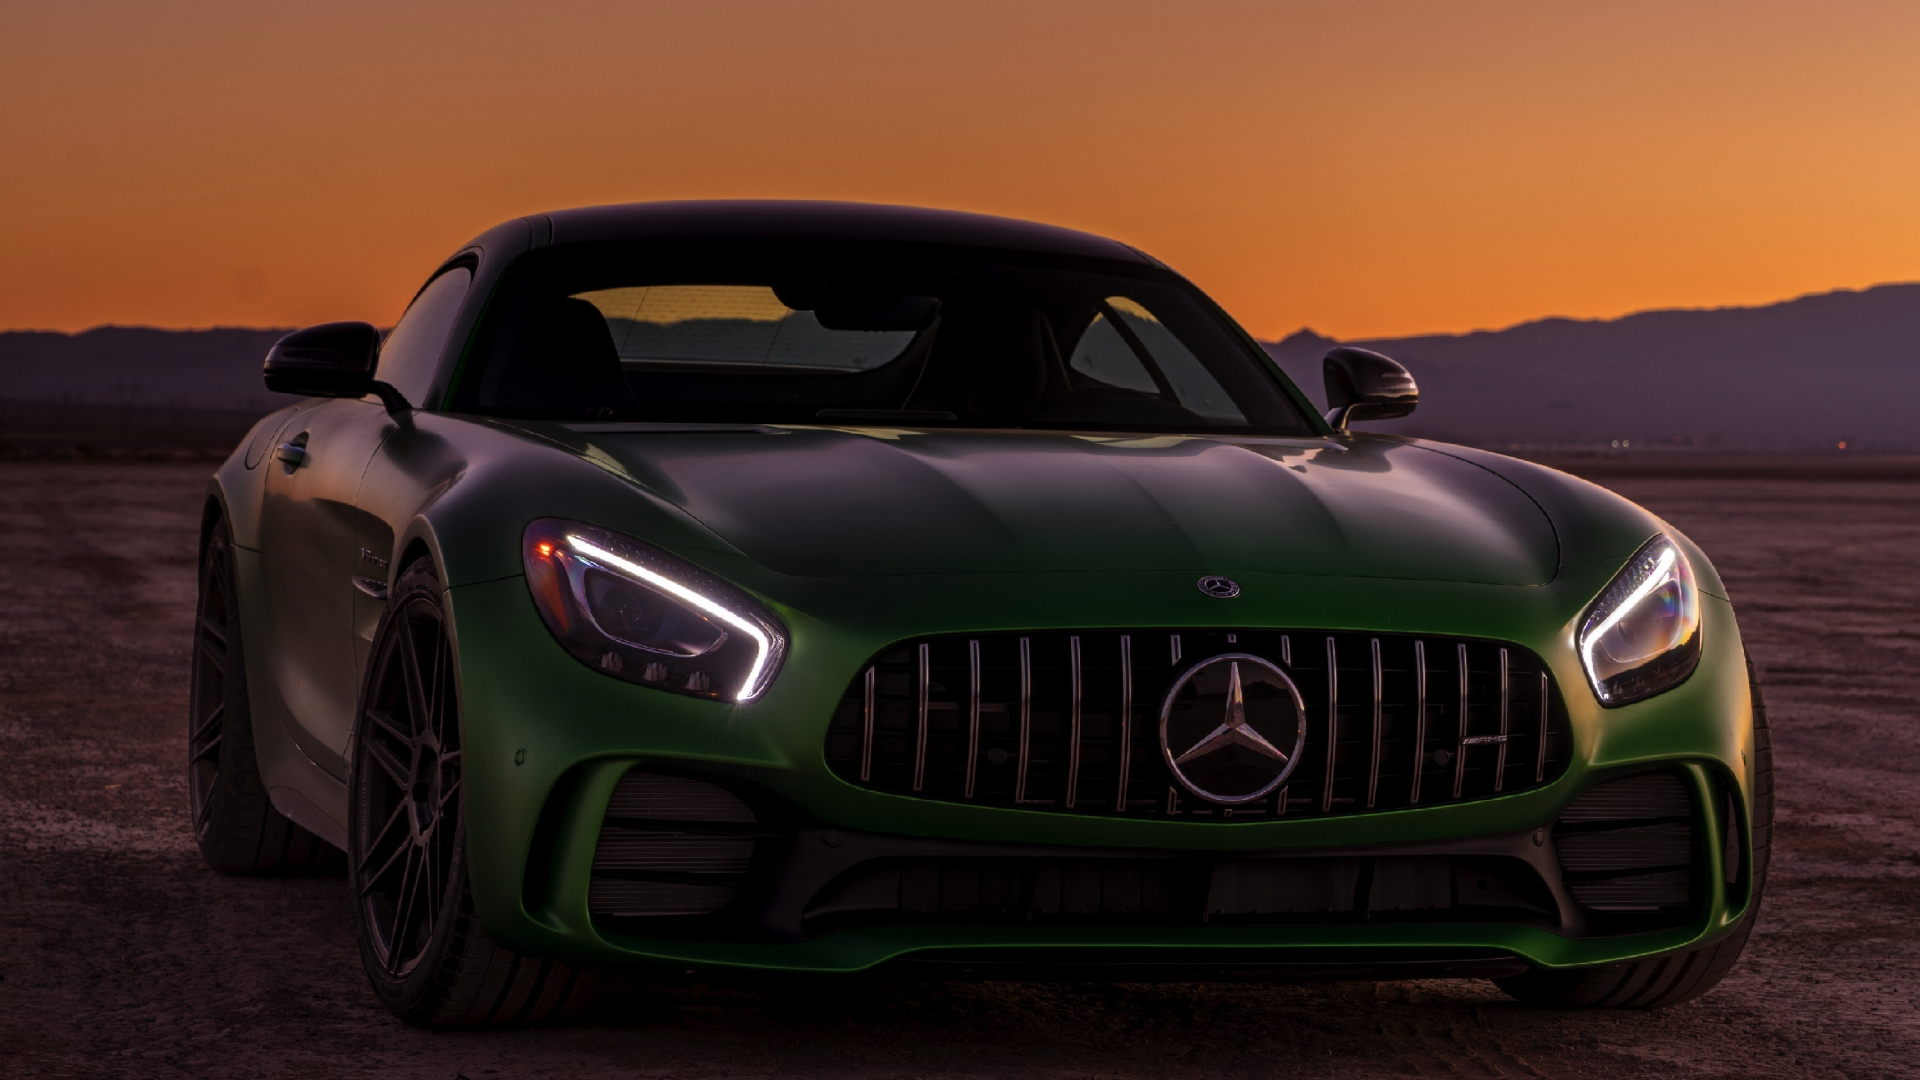 Download 1920x1080 Wallpaper The Mercedes Amg Gt R Sports Car Images, Photos, Reviews